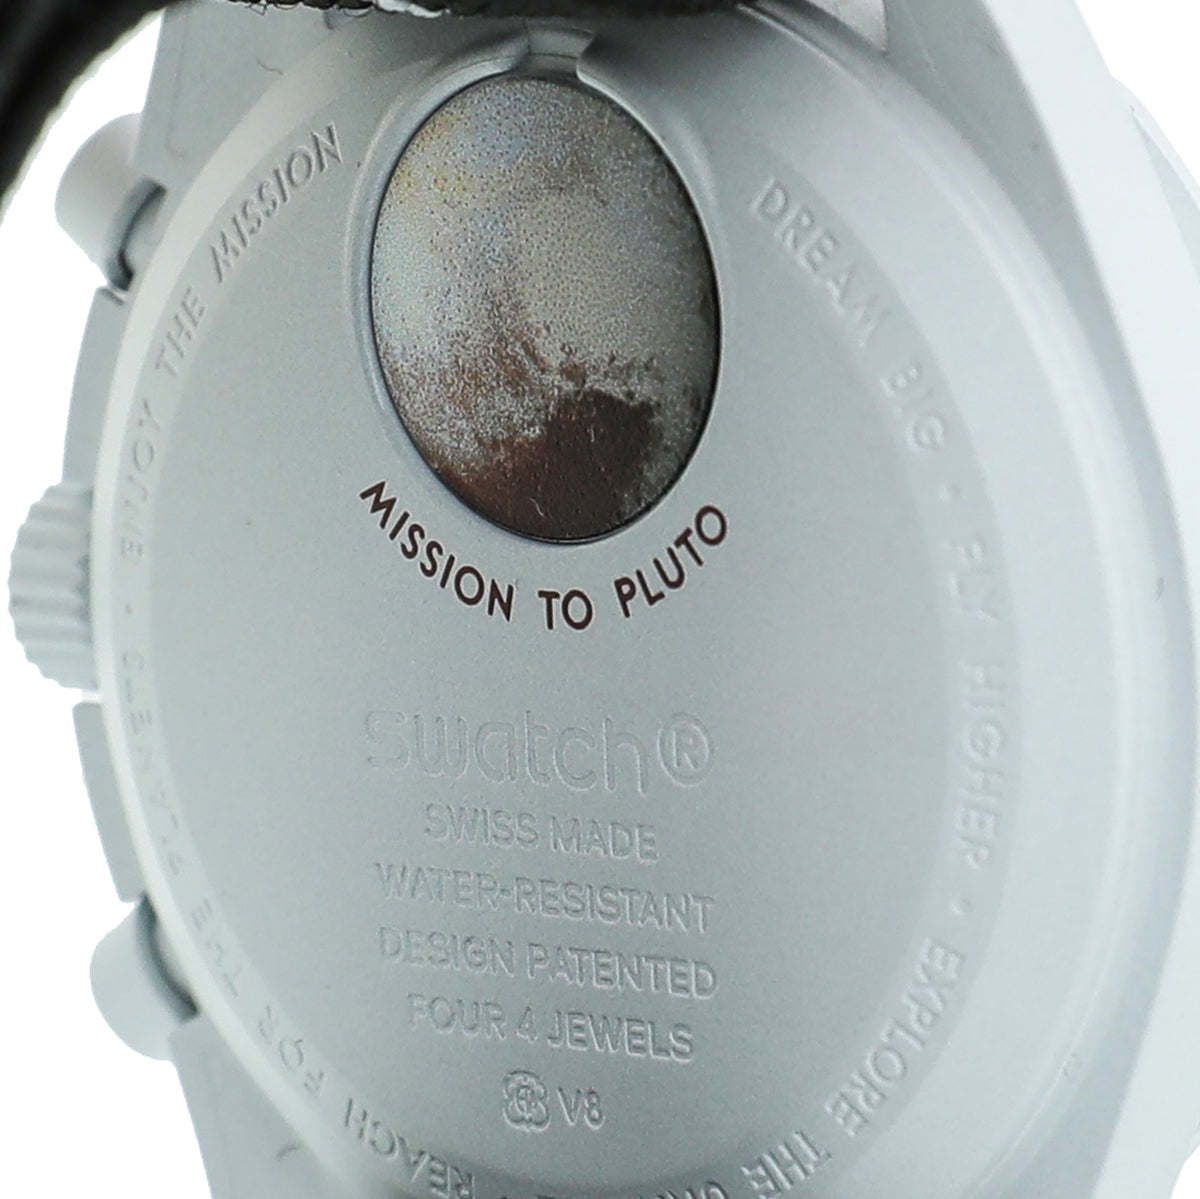 Omega Tricolor Bioceramic Moonswatch Mission to Pluto Watch